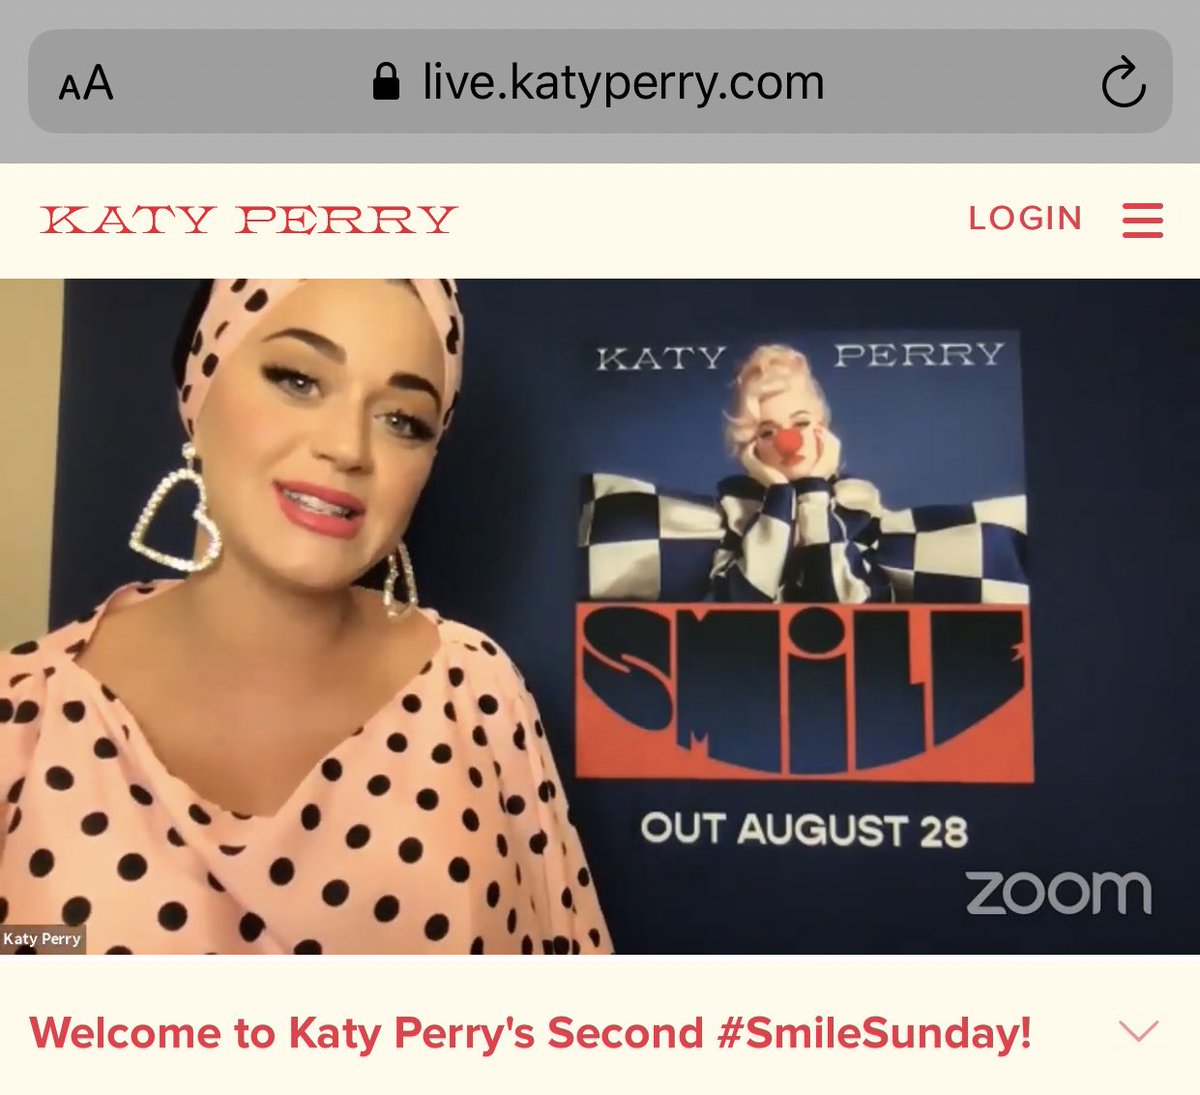 Time for the 2nd  #SmileSunday  @katyperry  #Smile